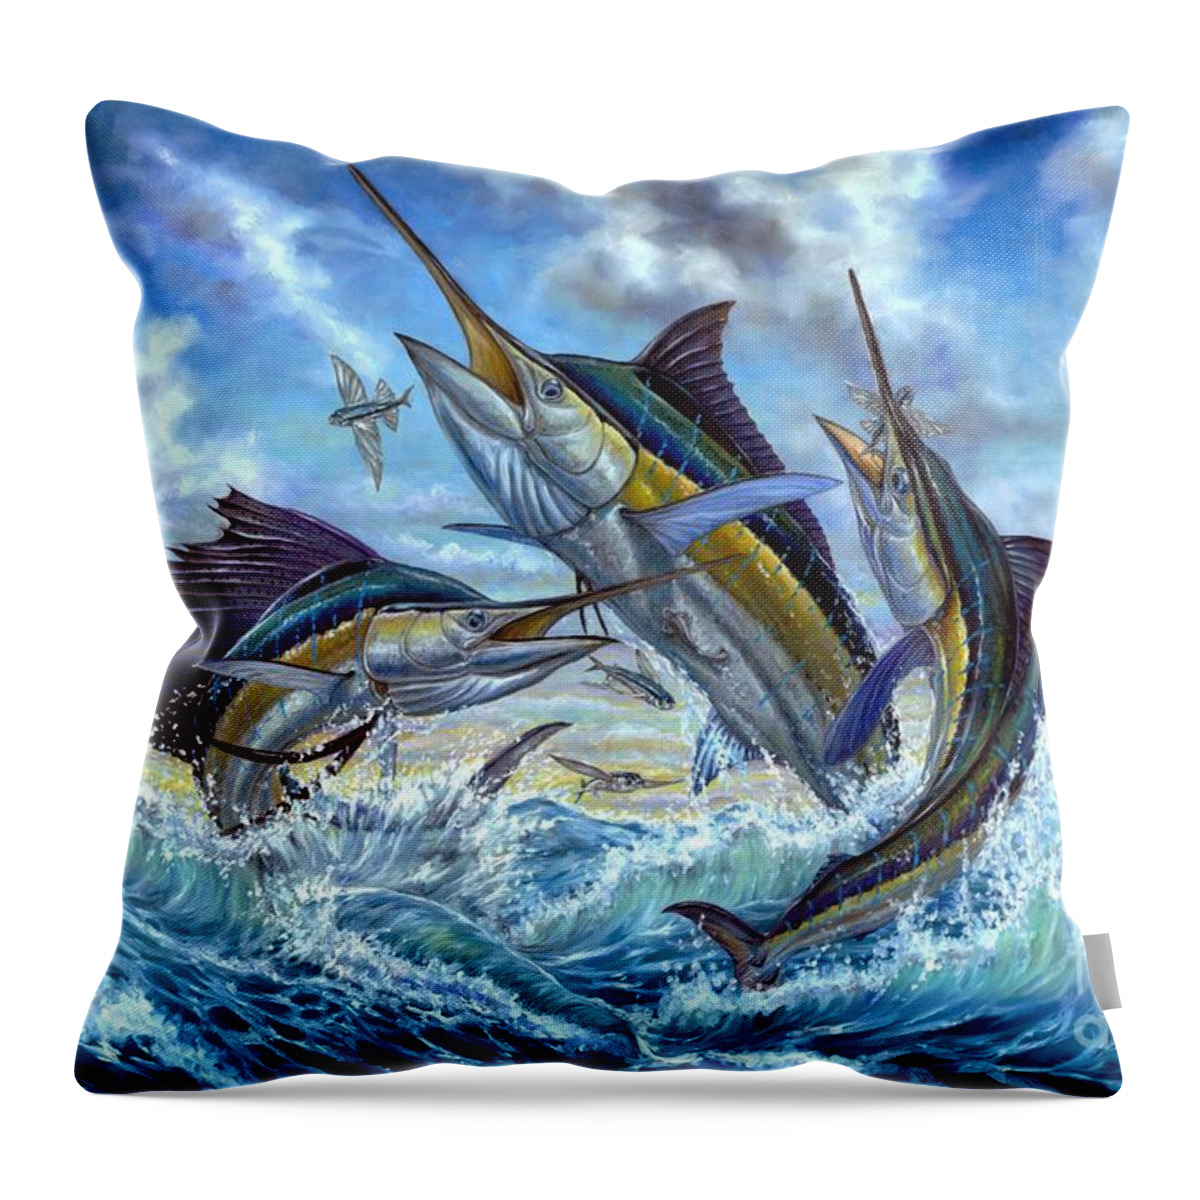 Blue Mrlin Throw Pillow featuring the painting Jumping Grand Slam And Flyingfish by Terry Fox